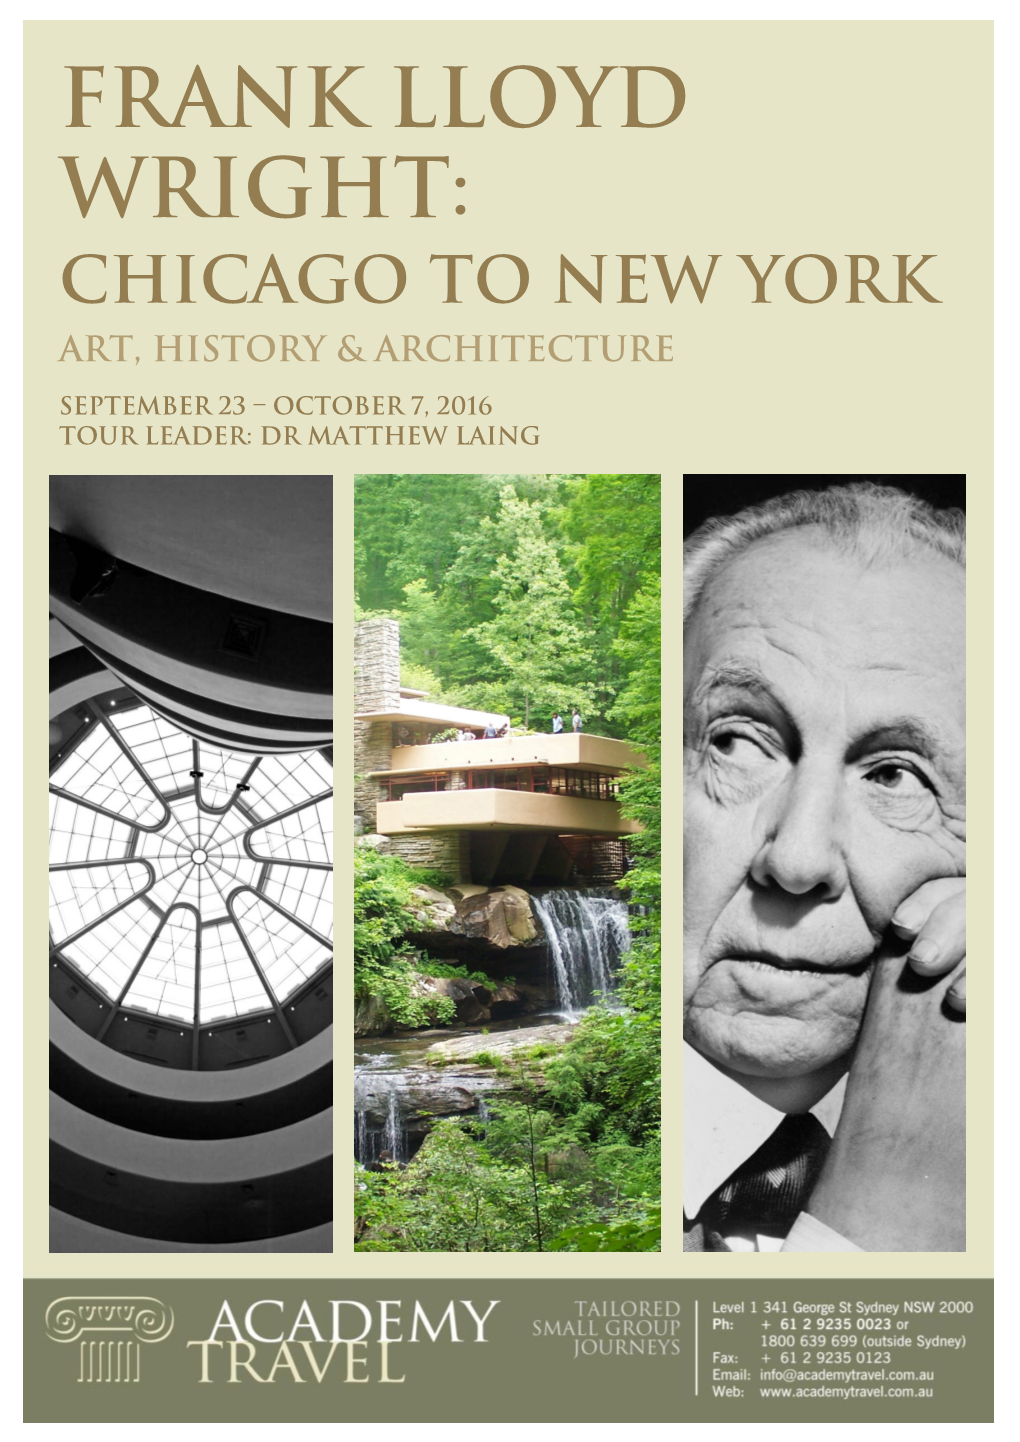 Frank Lloyd Wright: Chicago to New York Art, History & Architecture